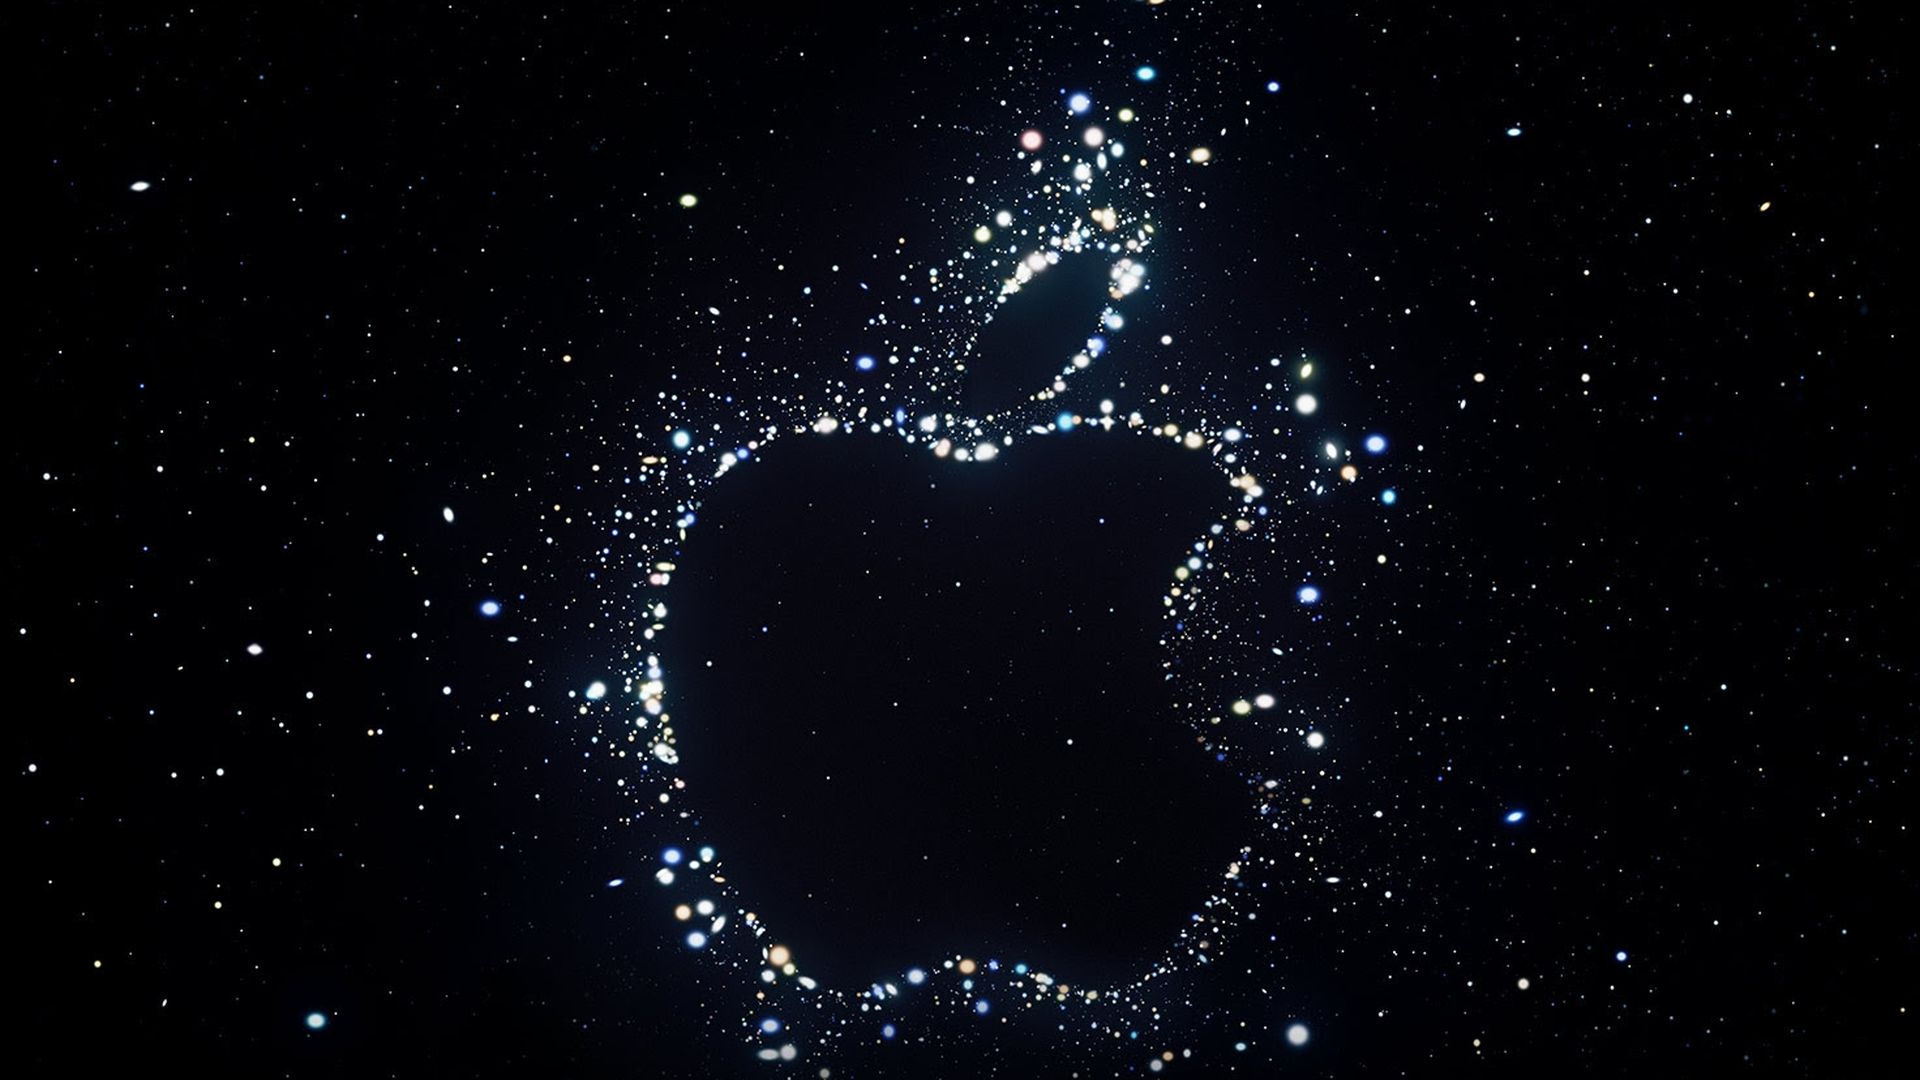 An illustration of an Apple logo made up of stars